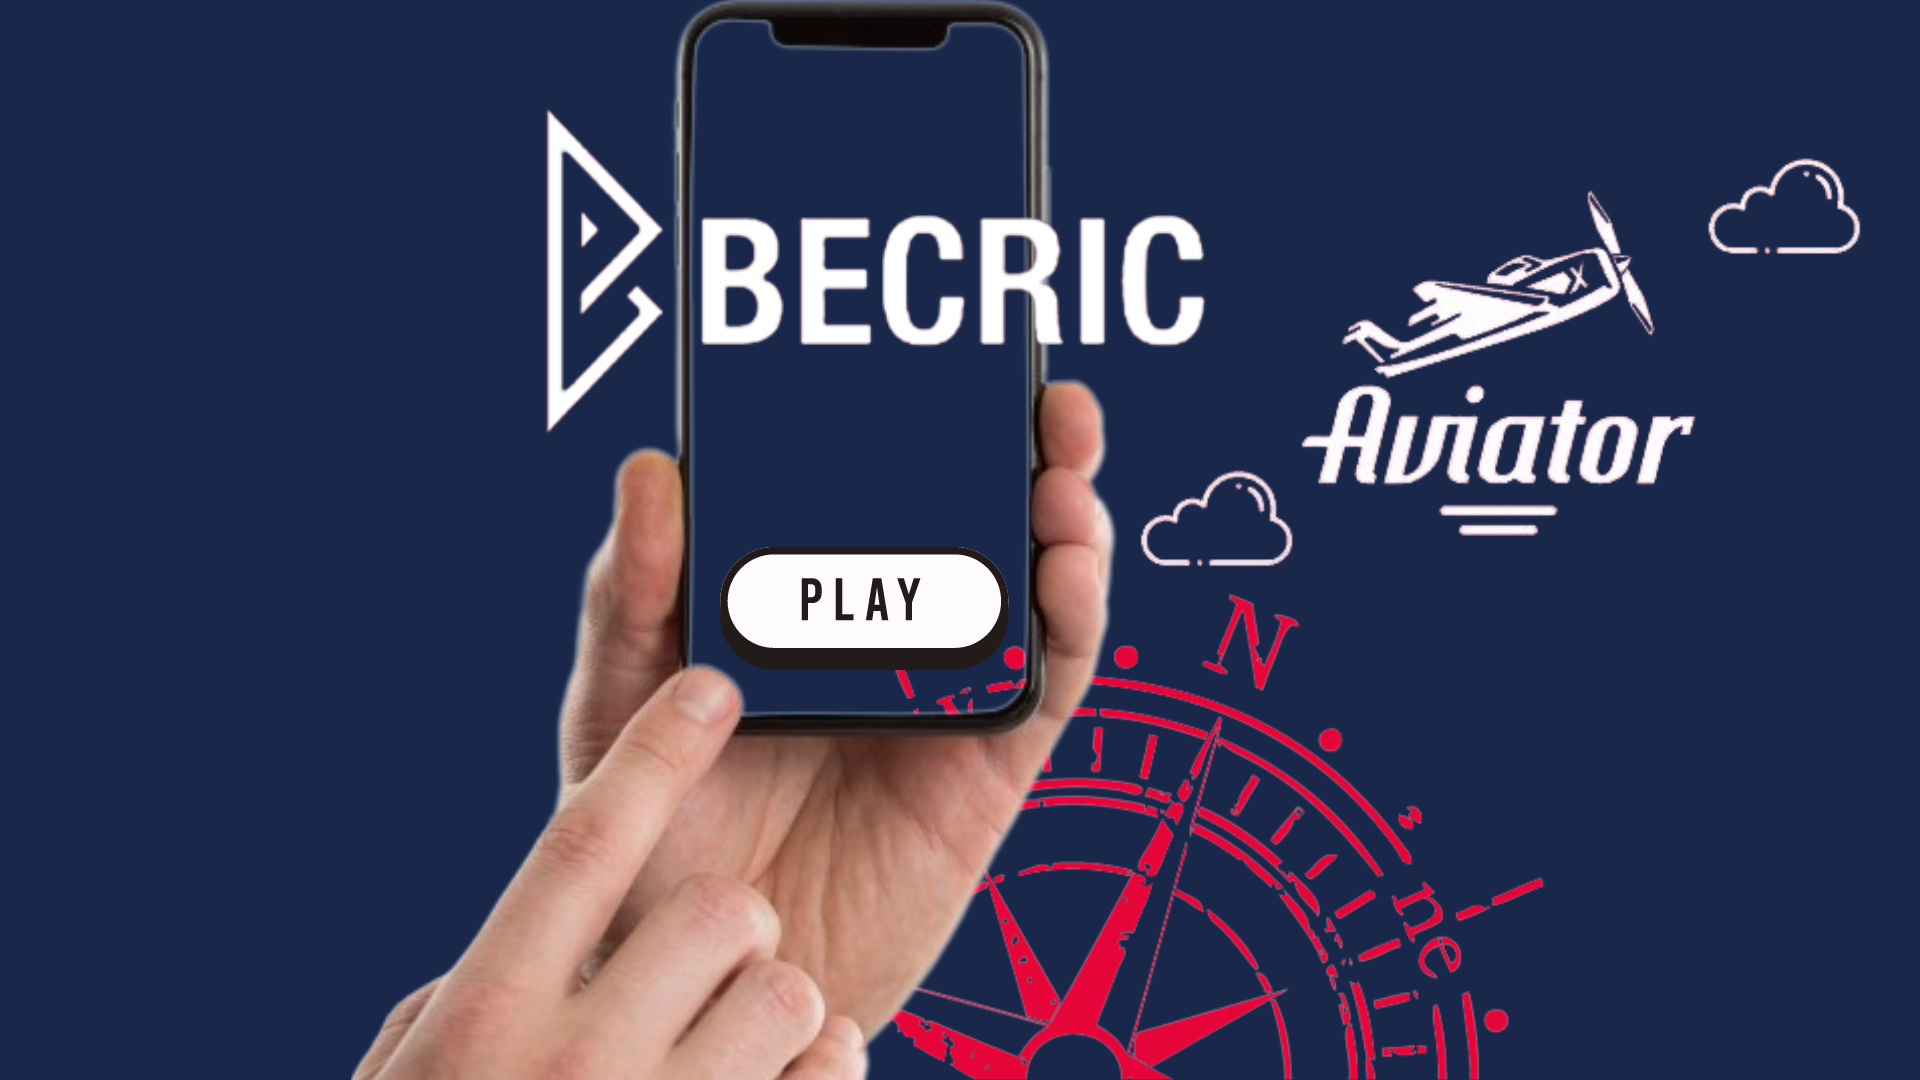 A person holding a smart phone in their hand and becric aviator app logo

